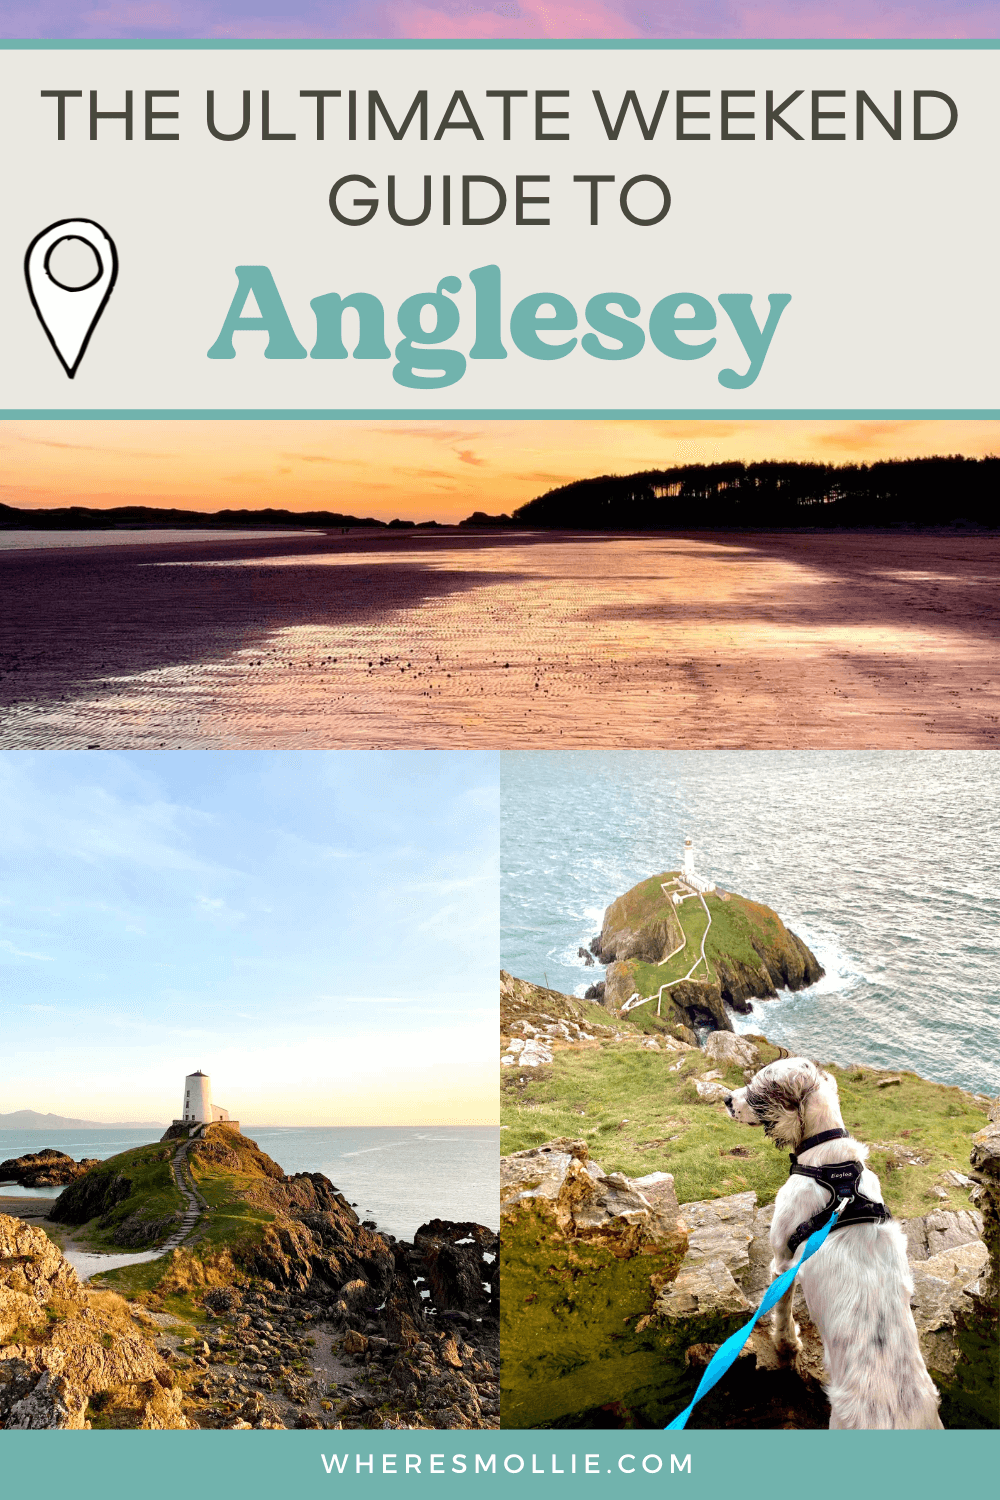 A weekend guide to Anglesey, Wales